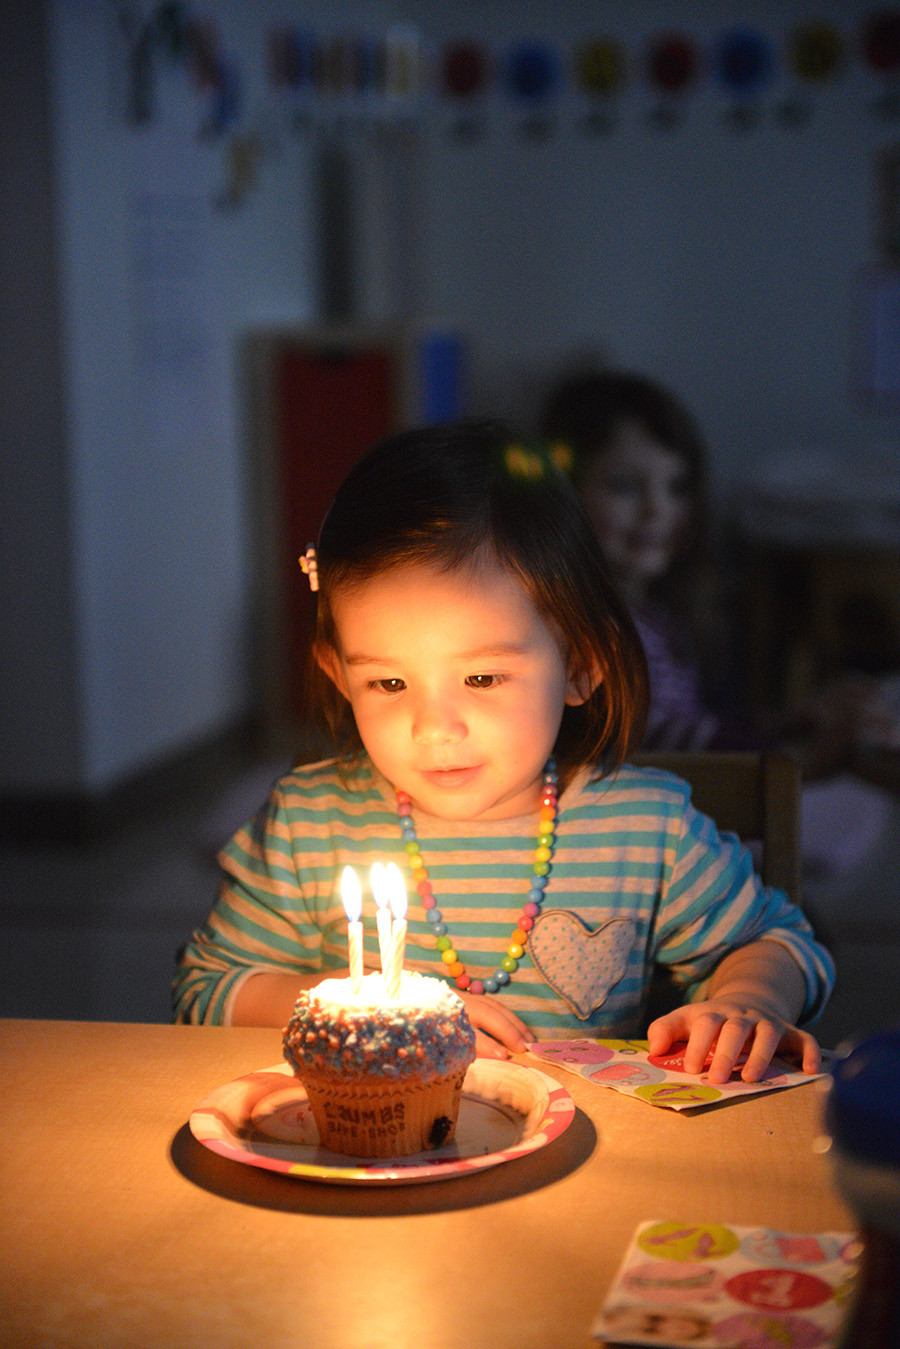 Kids Party Places In Queens Ny
 2014 Guide The Best Birthday Parties For Kids In NYC